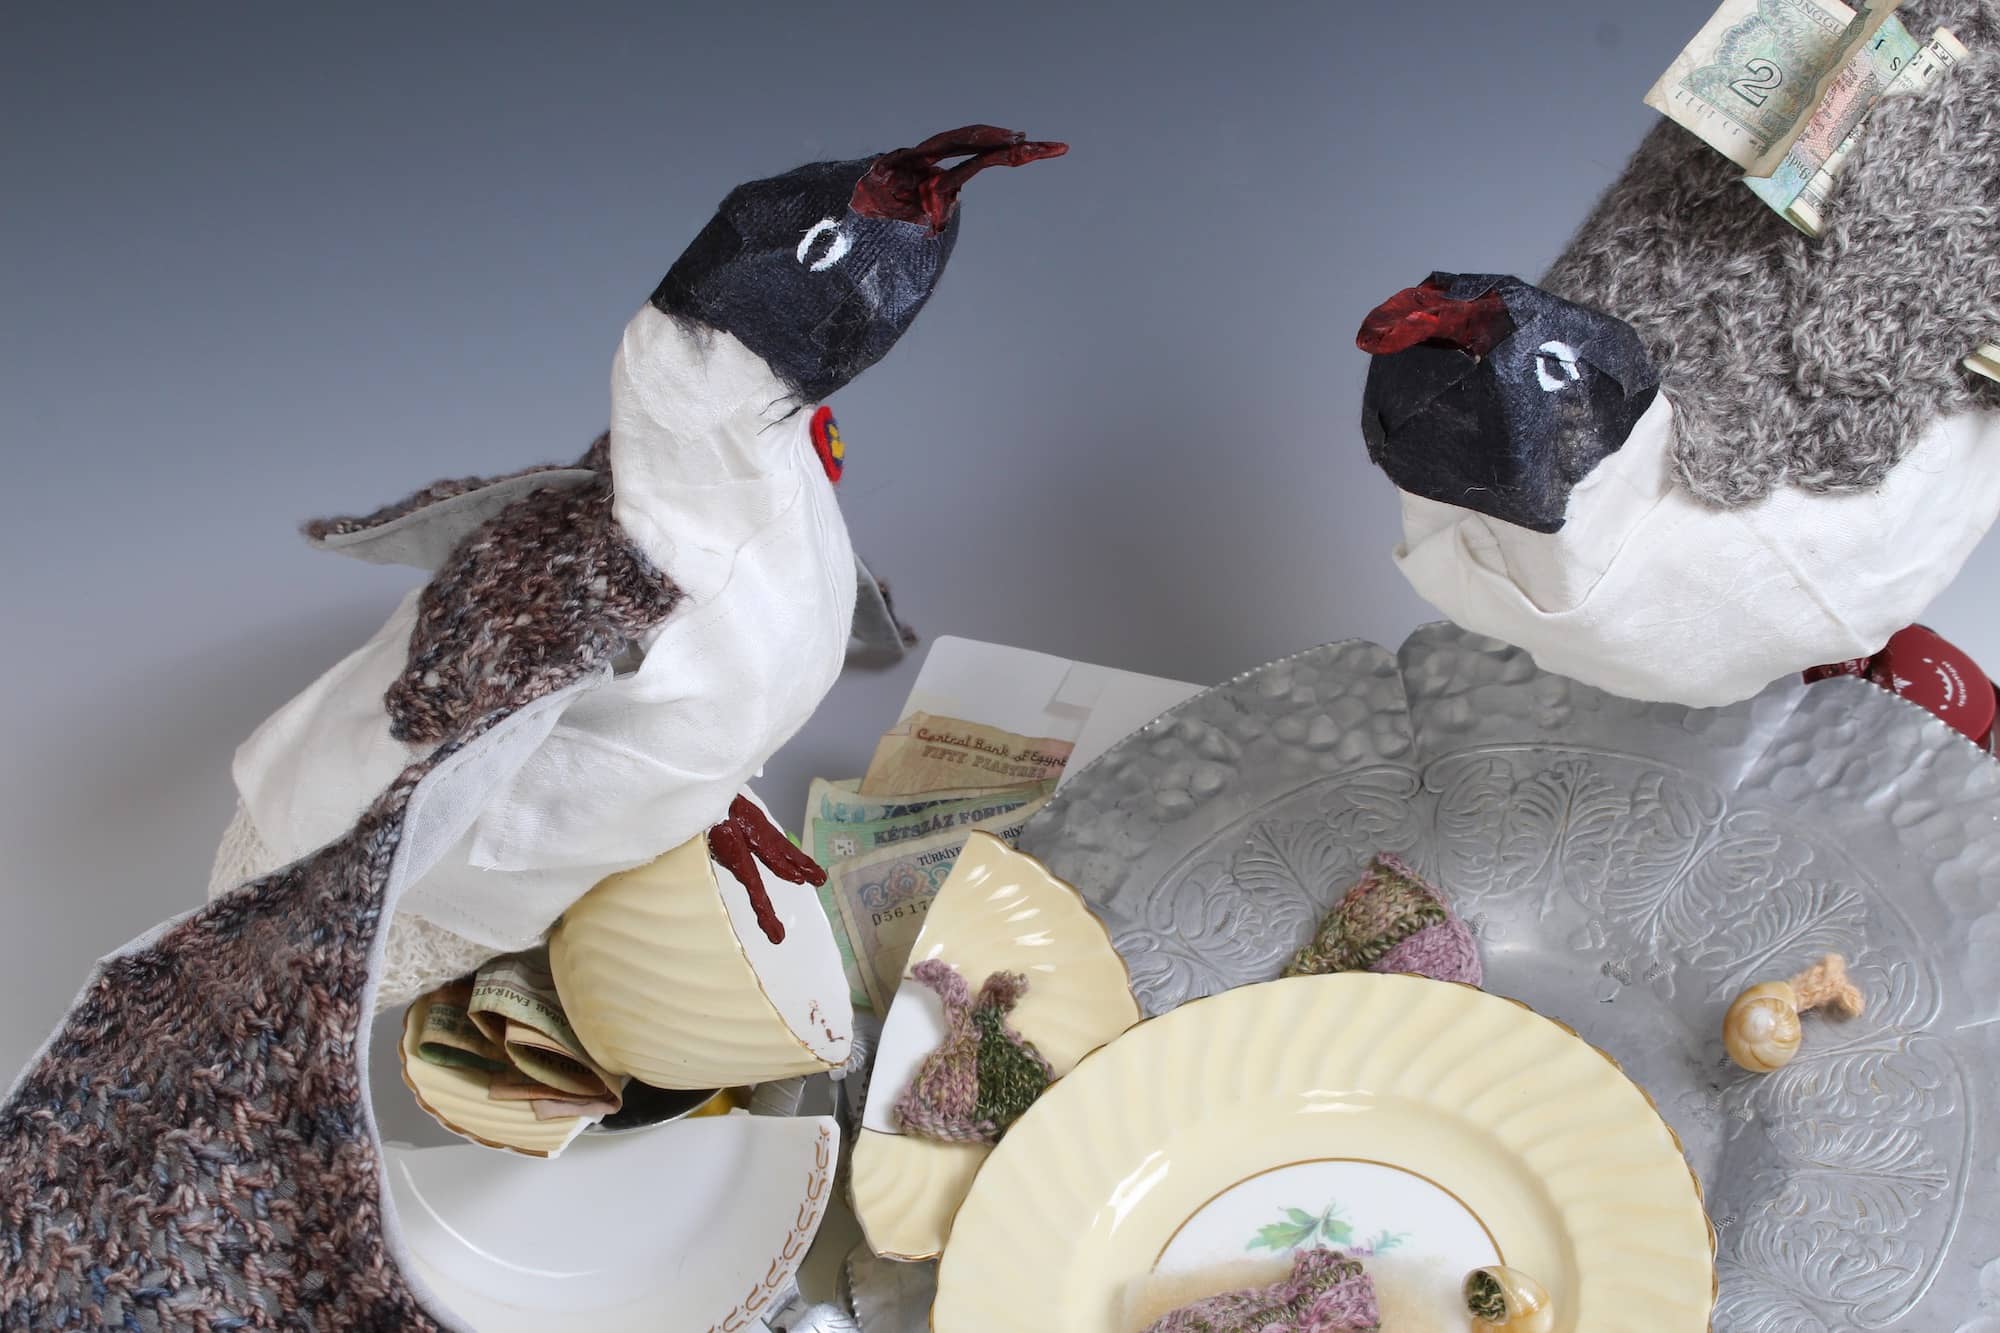 mixed media sculpture of gulls standing over broken china, money, and remains of lunch